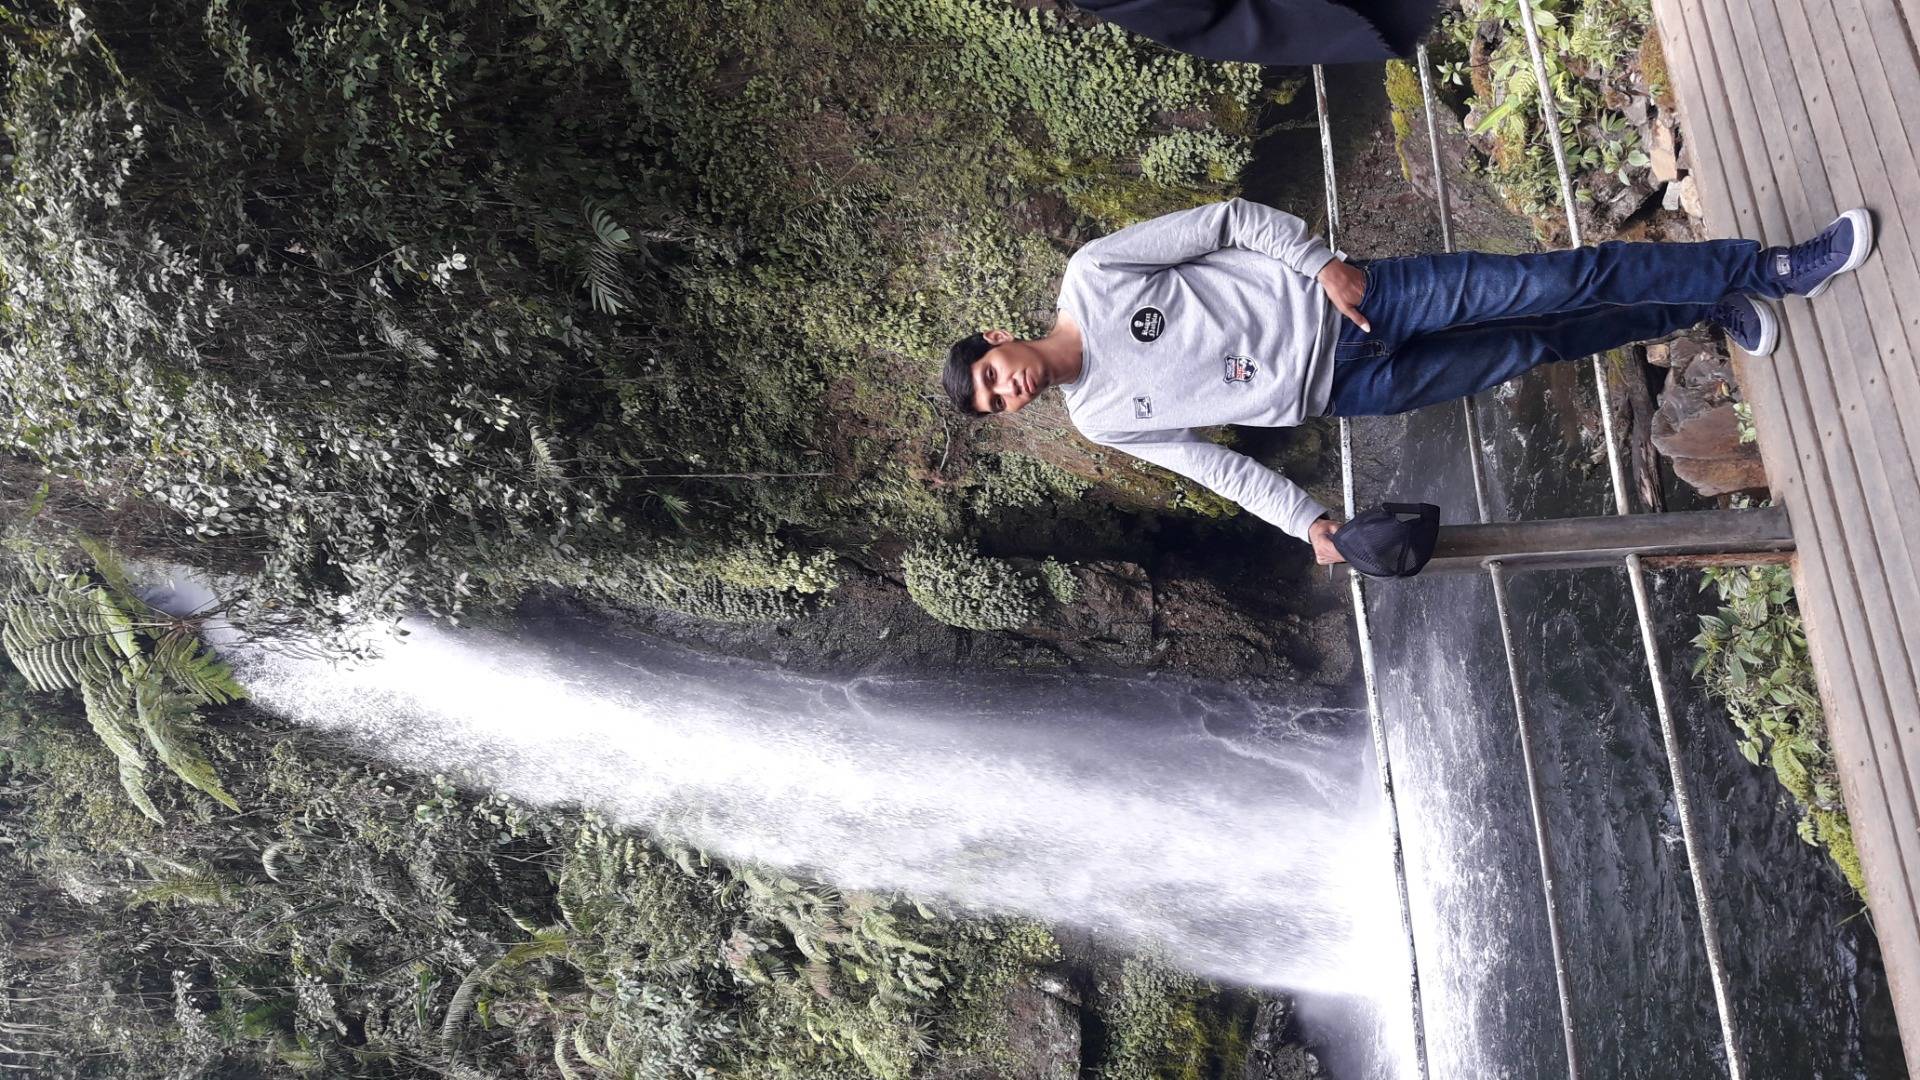 When in the waterfall "Curug Sawer" 